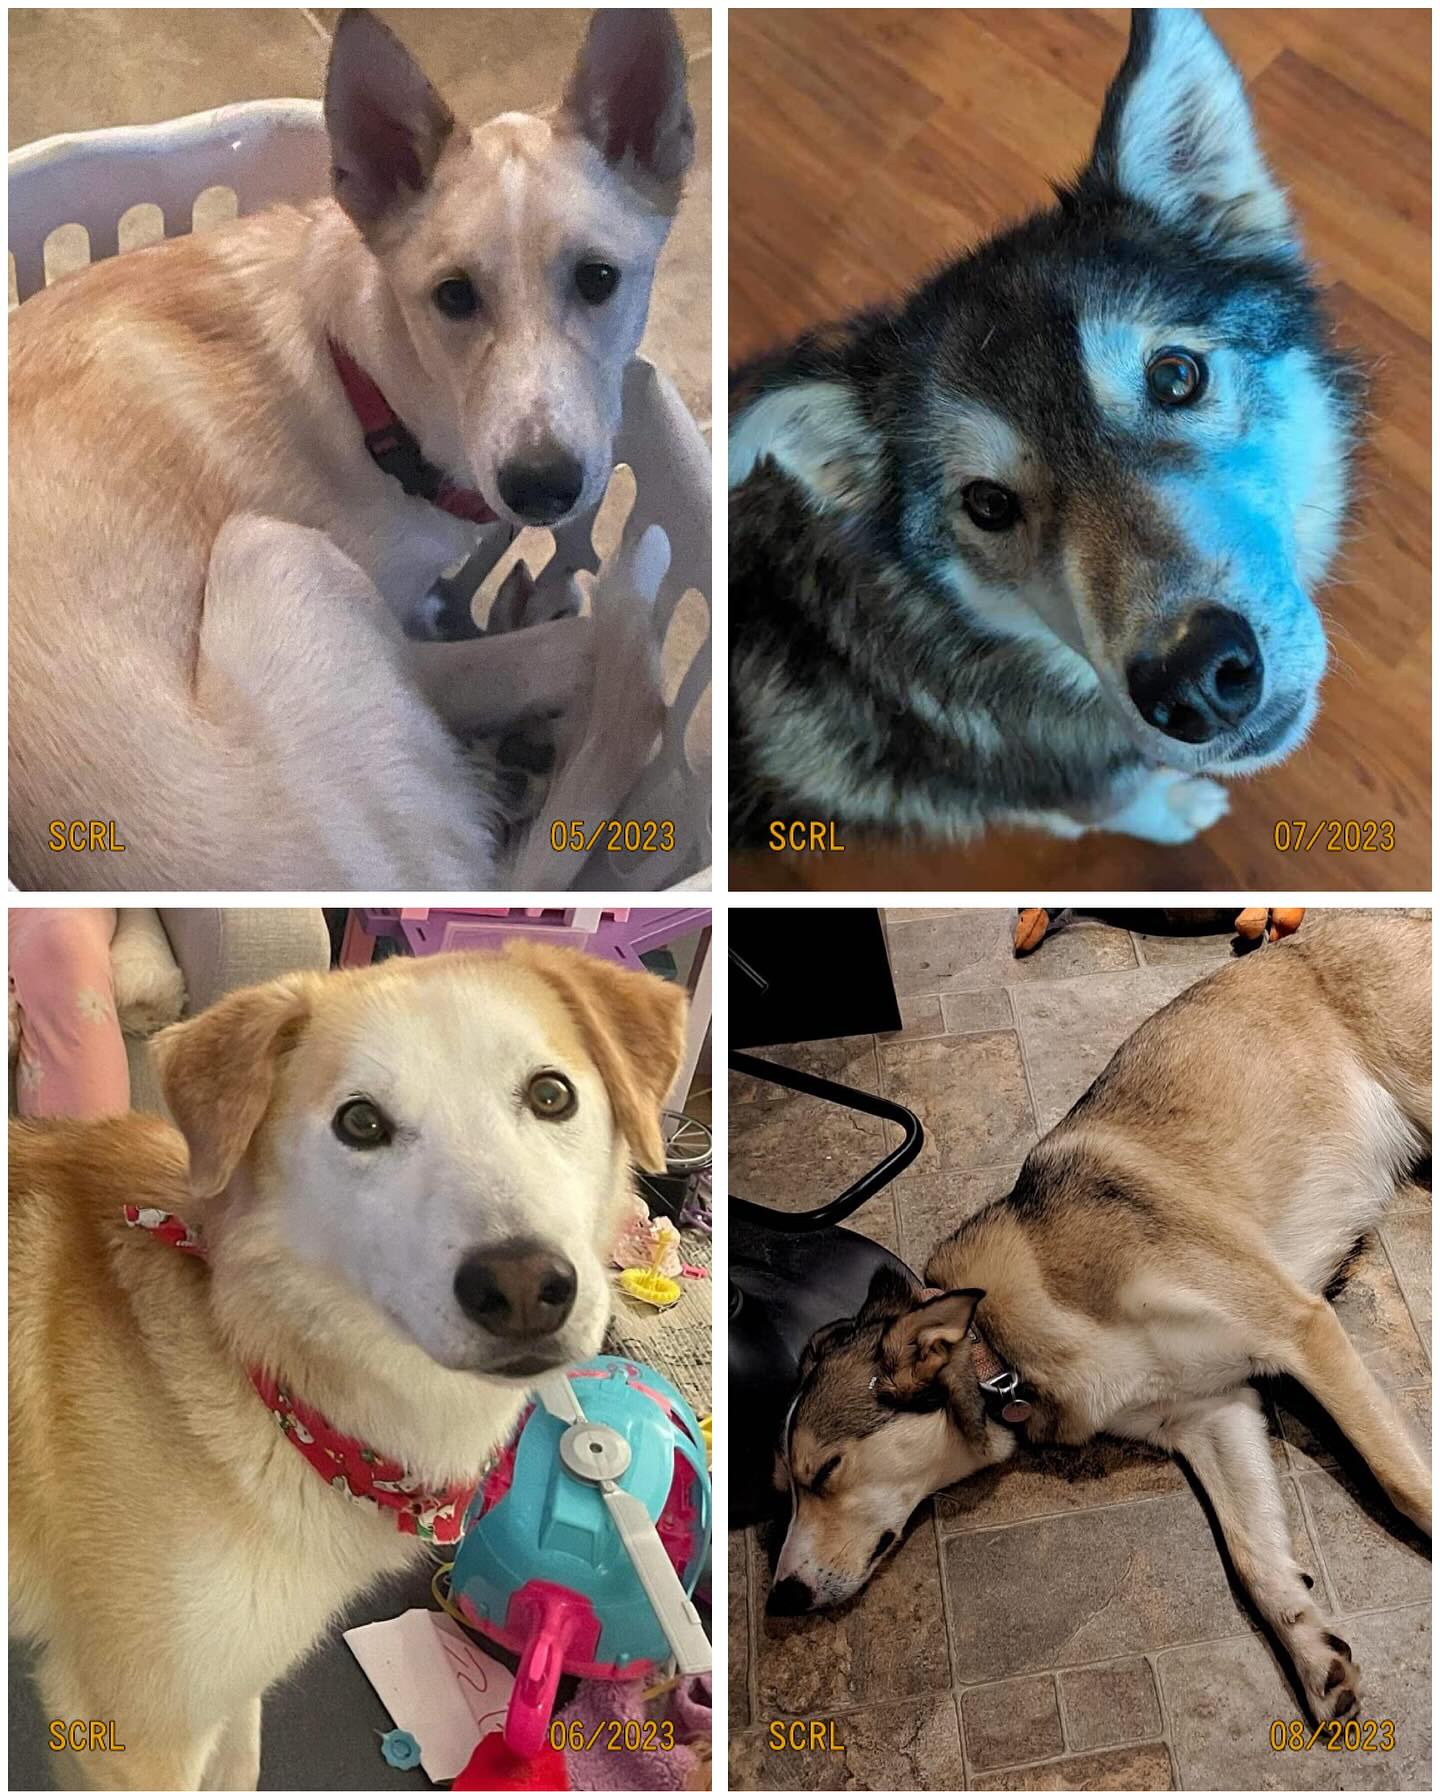 A few of the dogs I’ve rescued from the dog sledding industry🐾 Look at their beautiful faces 🥹💜 I love them!